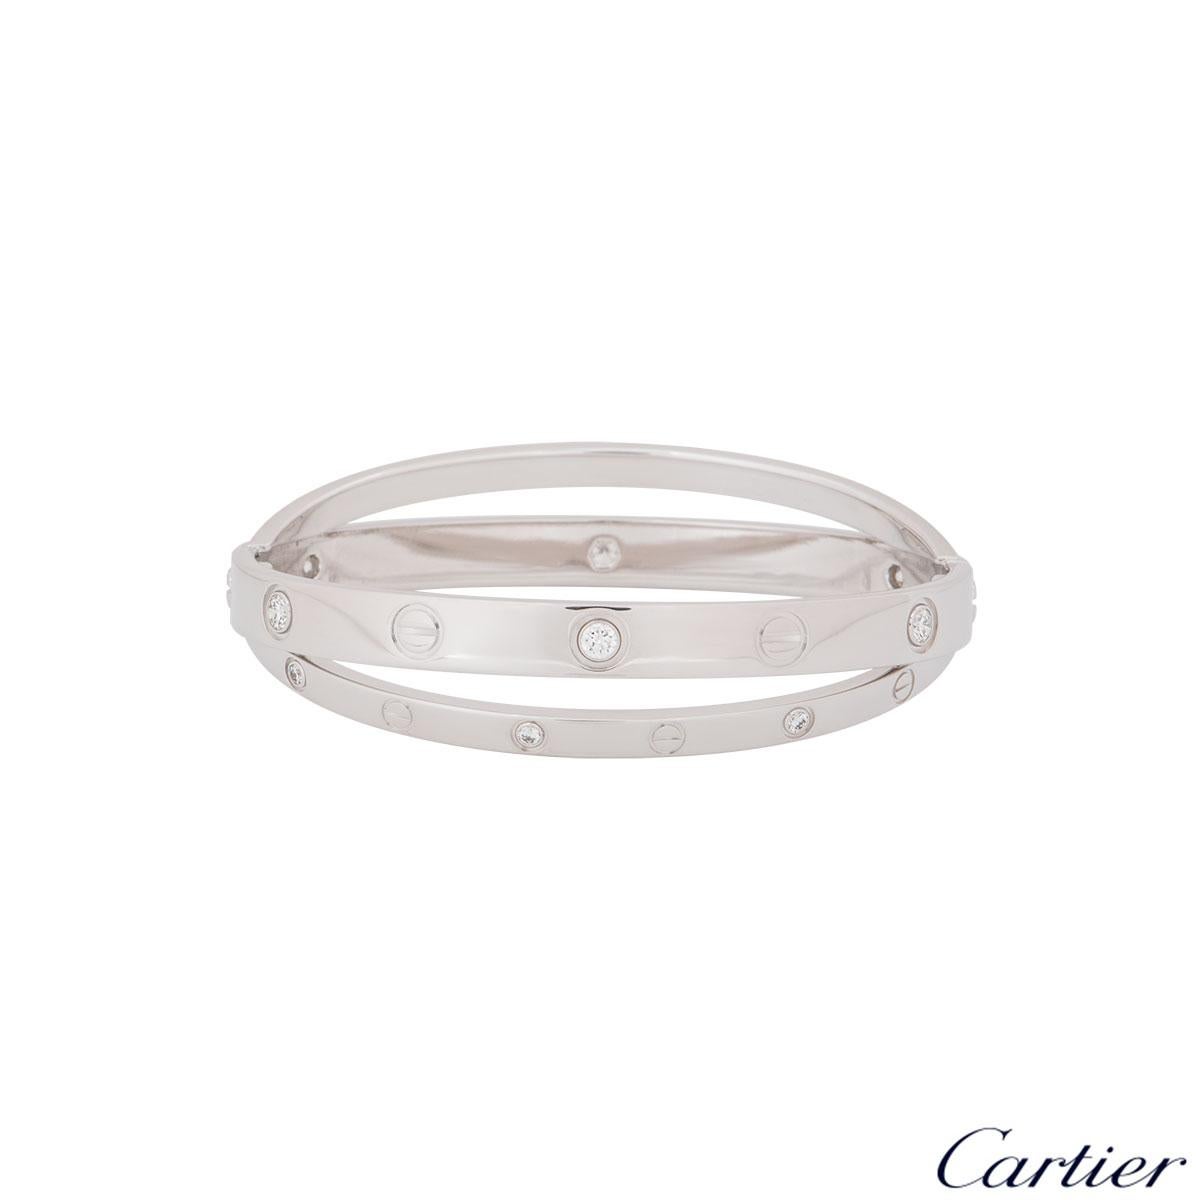 An iconic 18k white gold half diamond double Cartier bracelet from the Love collection. The double bangle features the iconic screw motif alternating with 12 round brilliant cut diamonds displayed around the outer edge. The bracelet is a size 16 and